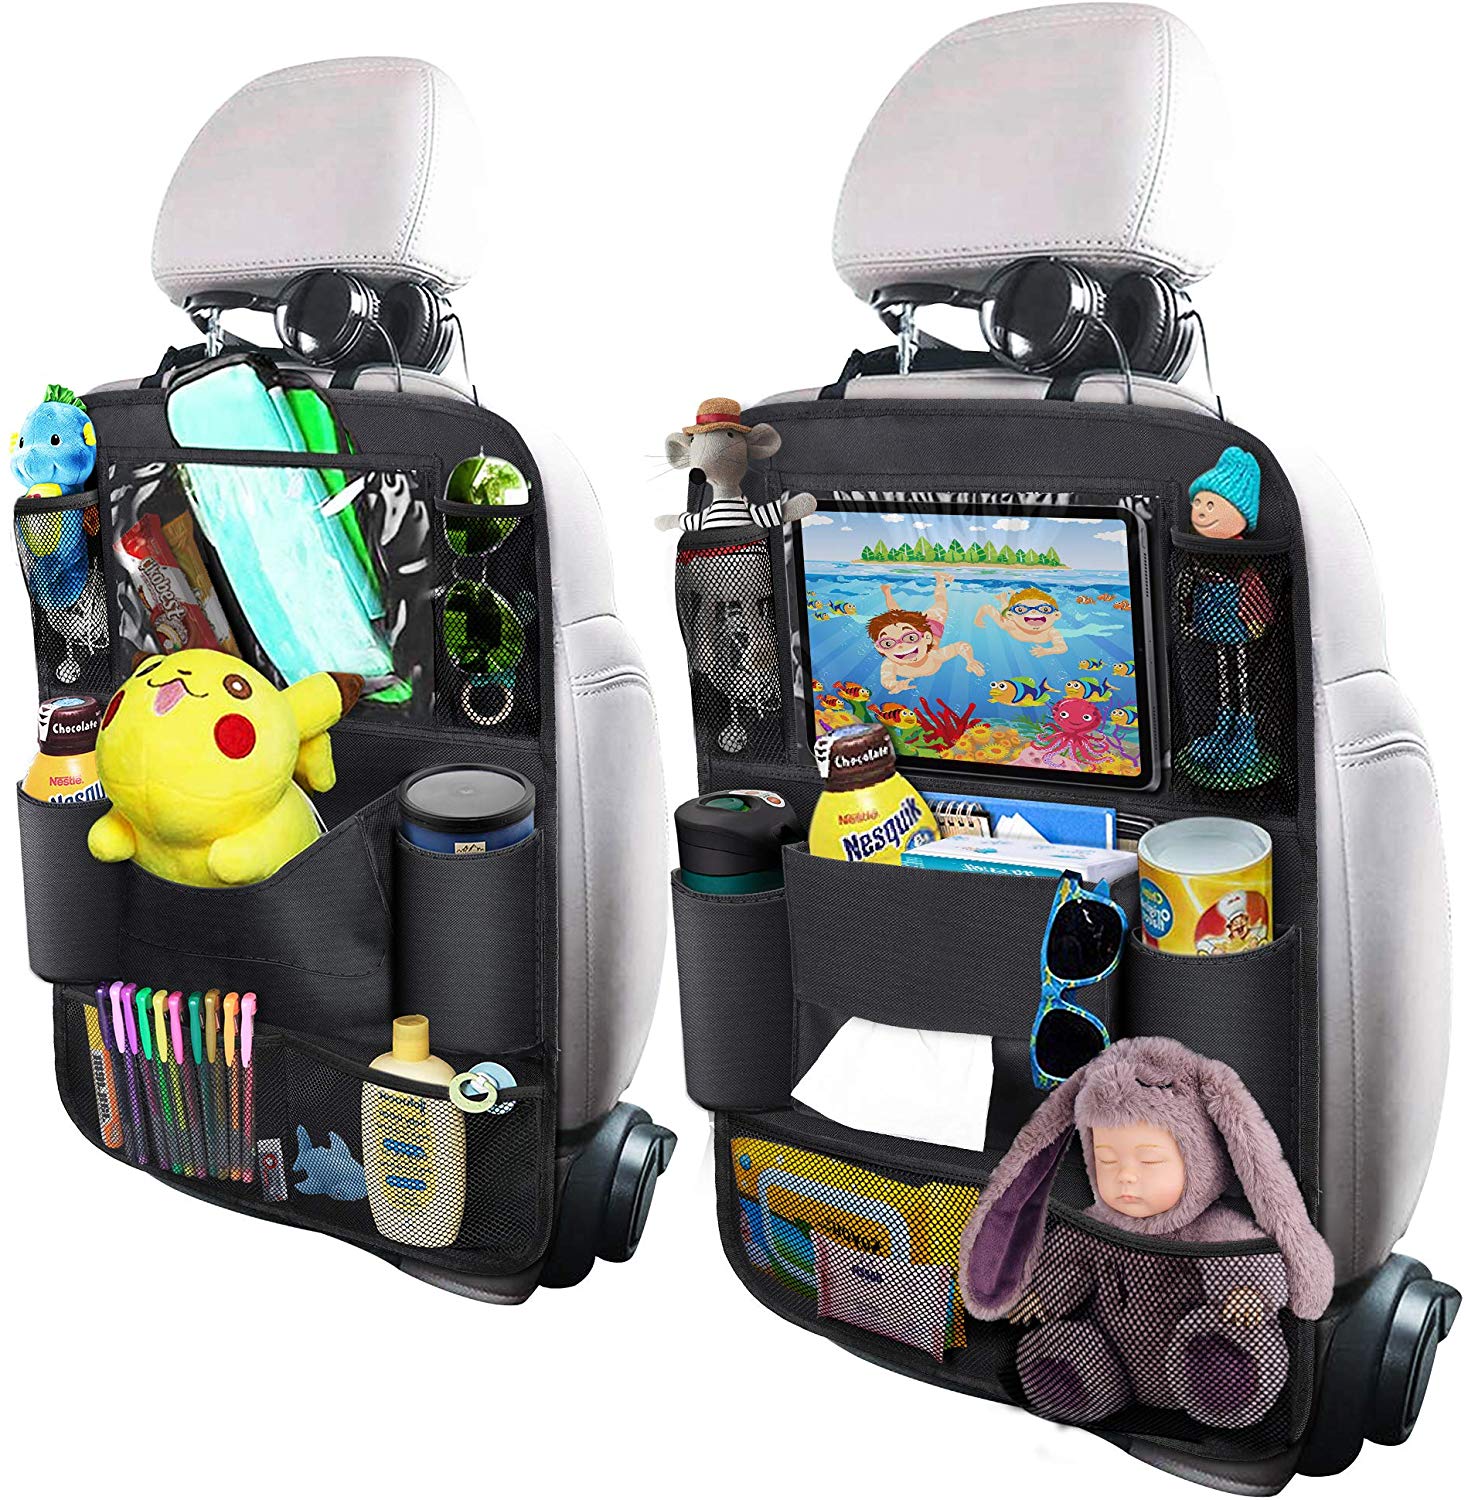 OYRGCIK Backseat Car Organizer, Kick Mats Car Back Seat Protector with Touch Screen Tablet Holder Tissue Box 8 Storage Pockets for Toys Book Bottle Drinks Kids Baby Toddler Travel Accessories, 2 Pack